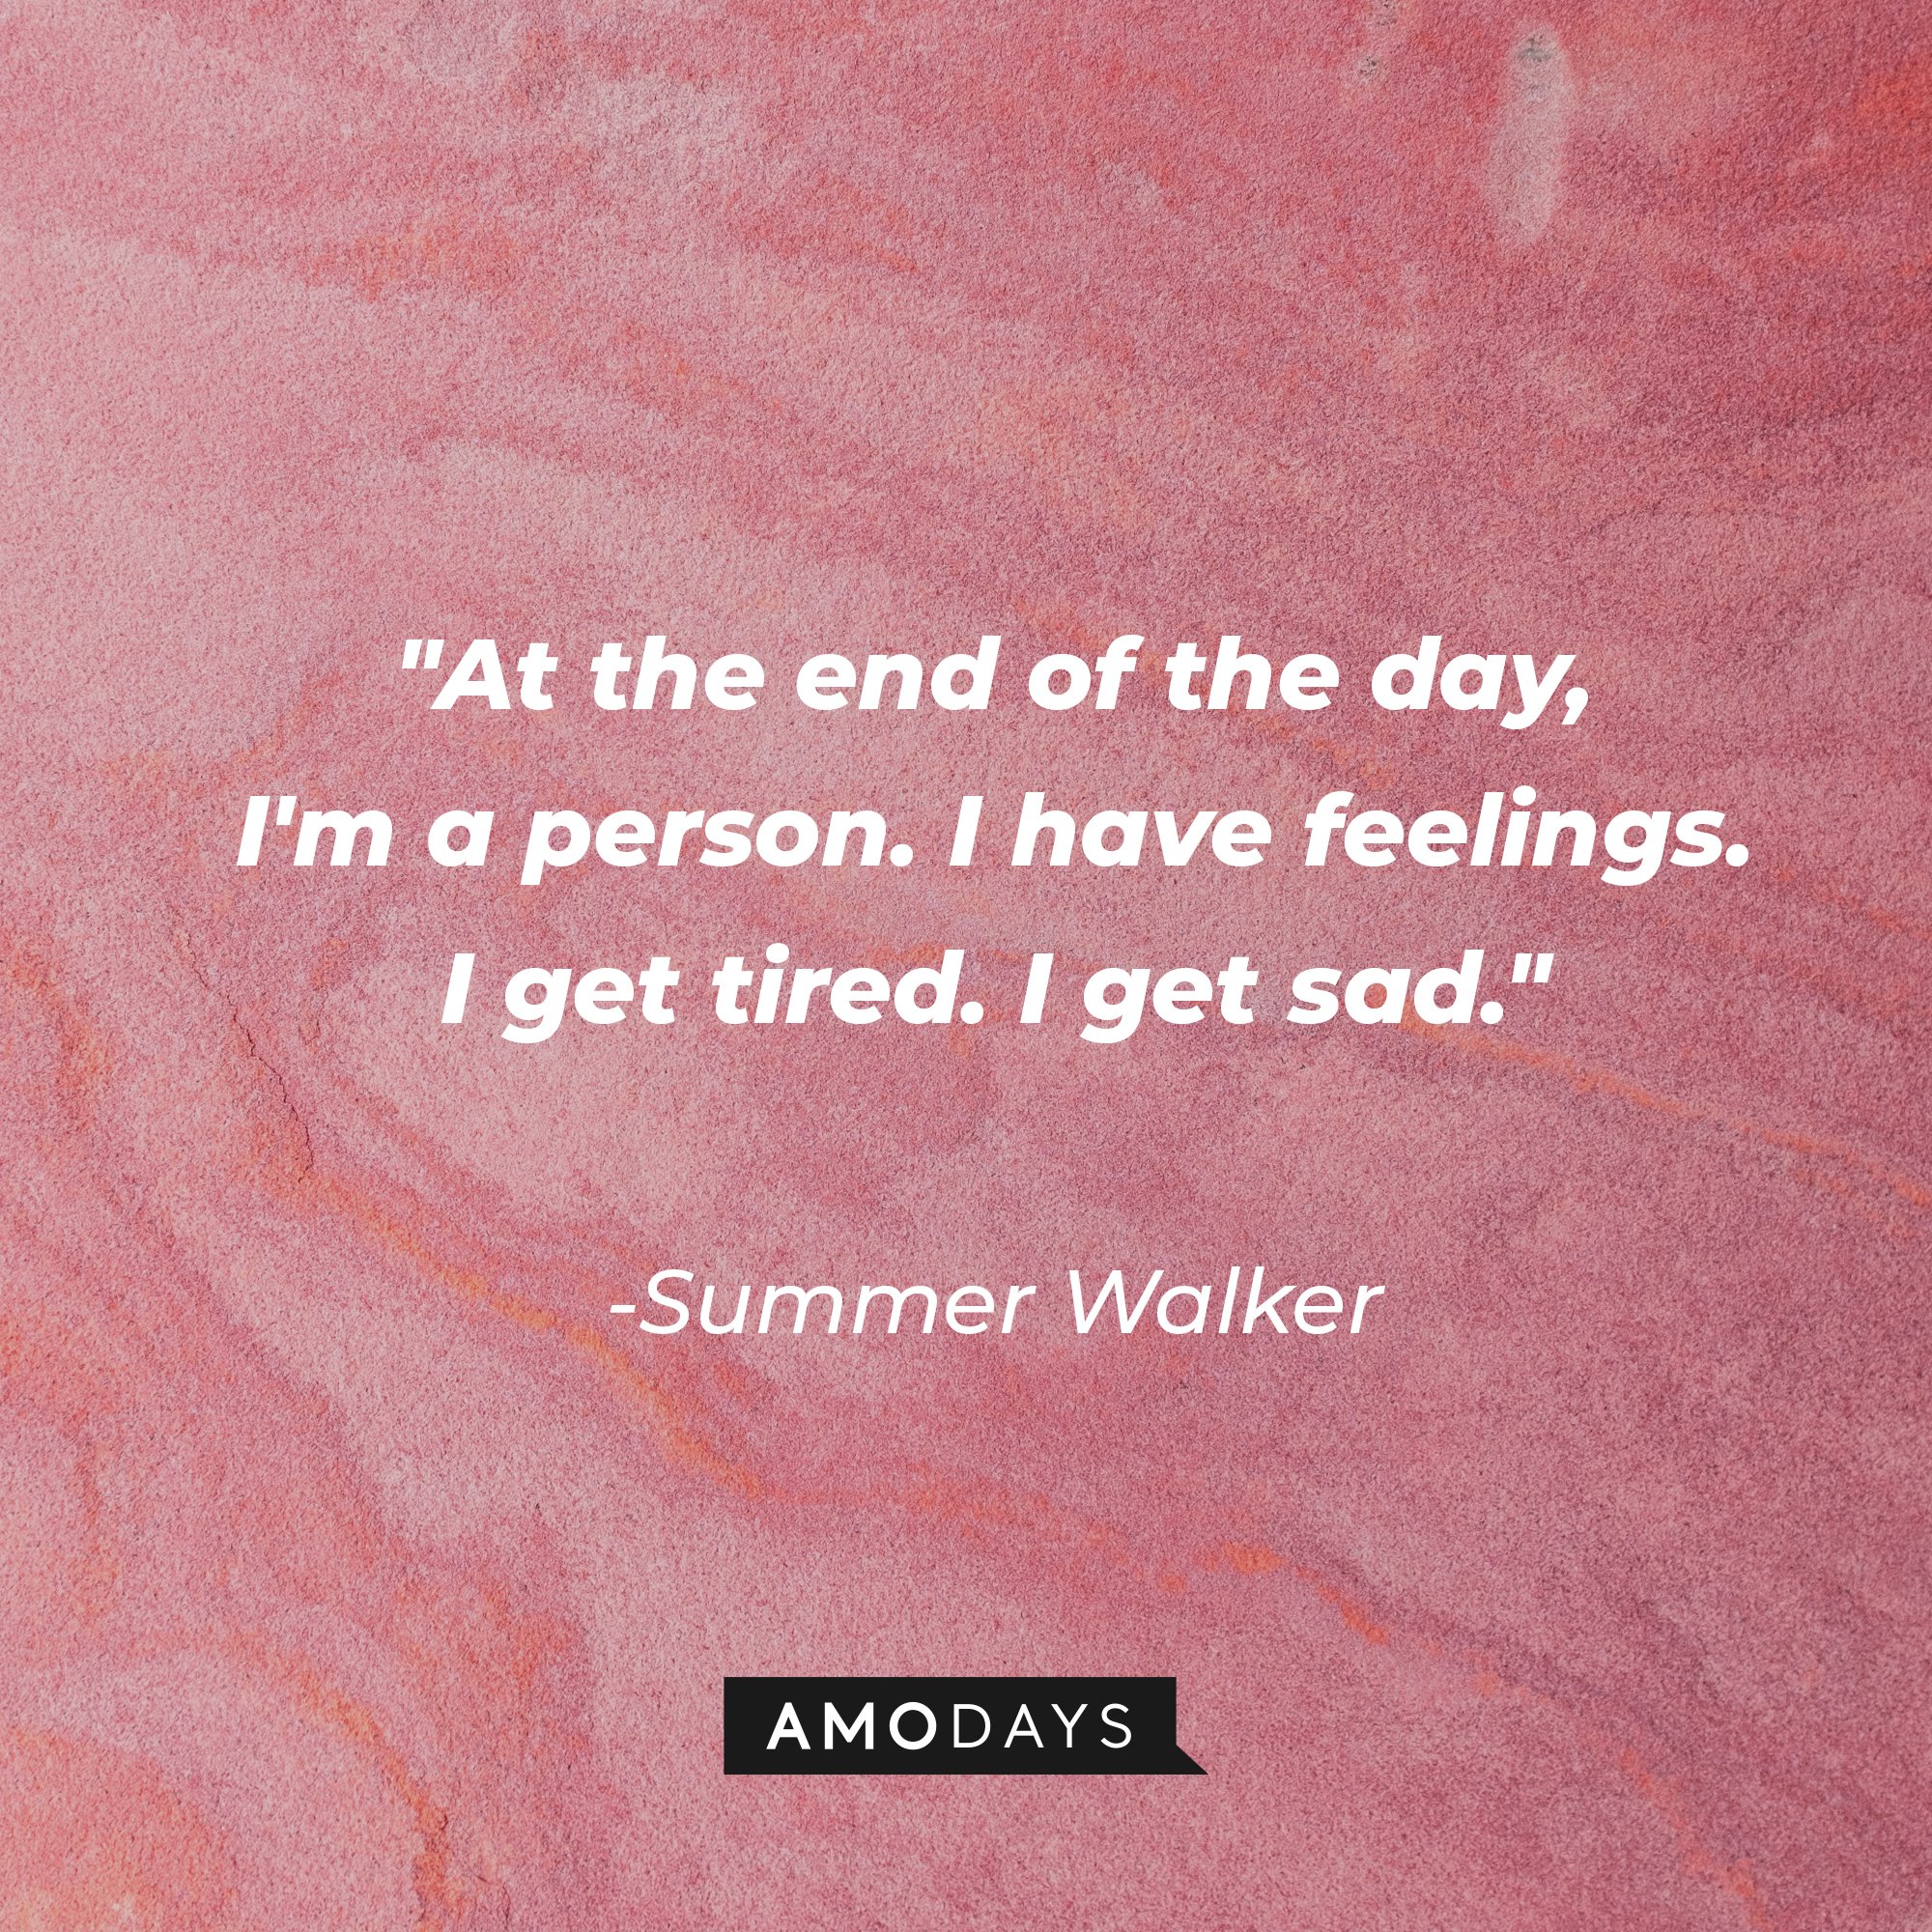 Summer Walker's quote: "At the end of the day, I'm a person. I have feelings. I get tired. I get sad." | Image: AmoDays